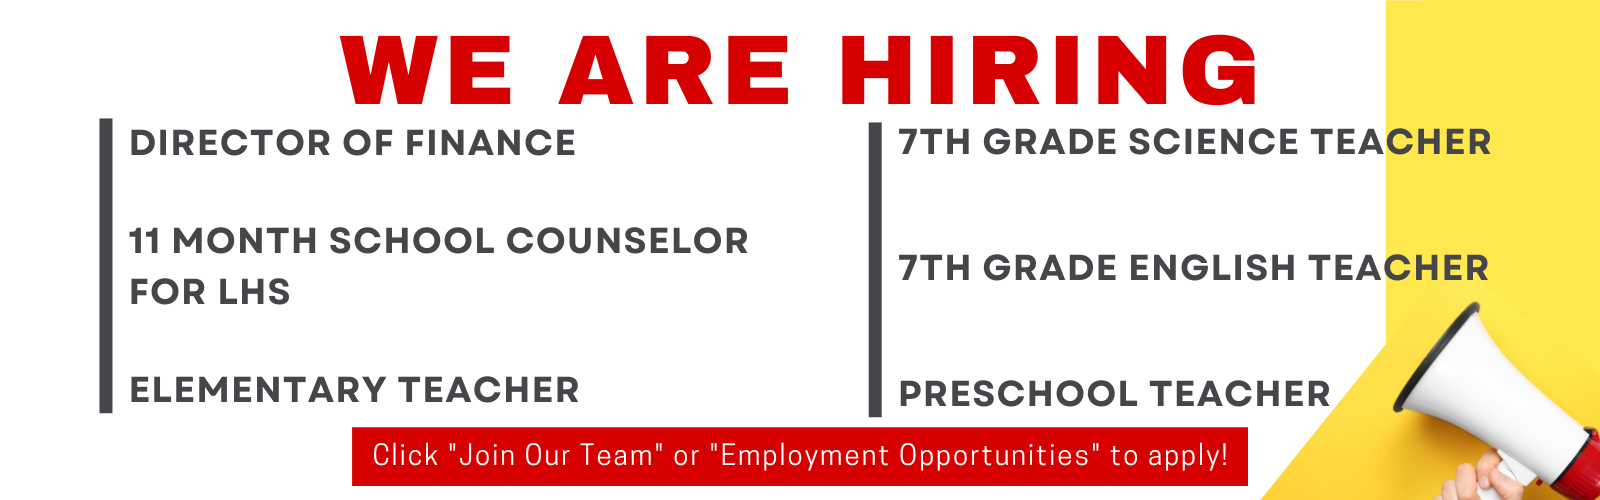 We are hiring. Director of Finance, 11 month school counselor for LHS, Elementary teacher, 7th grade science teacher, 7th grade english teacher, preschool teacher. Click Join Our Team or Employment Opportunities to apply!